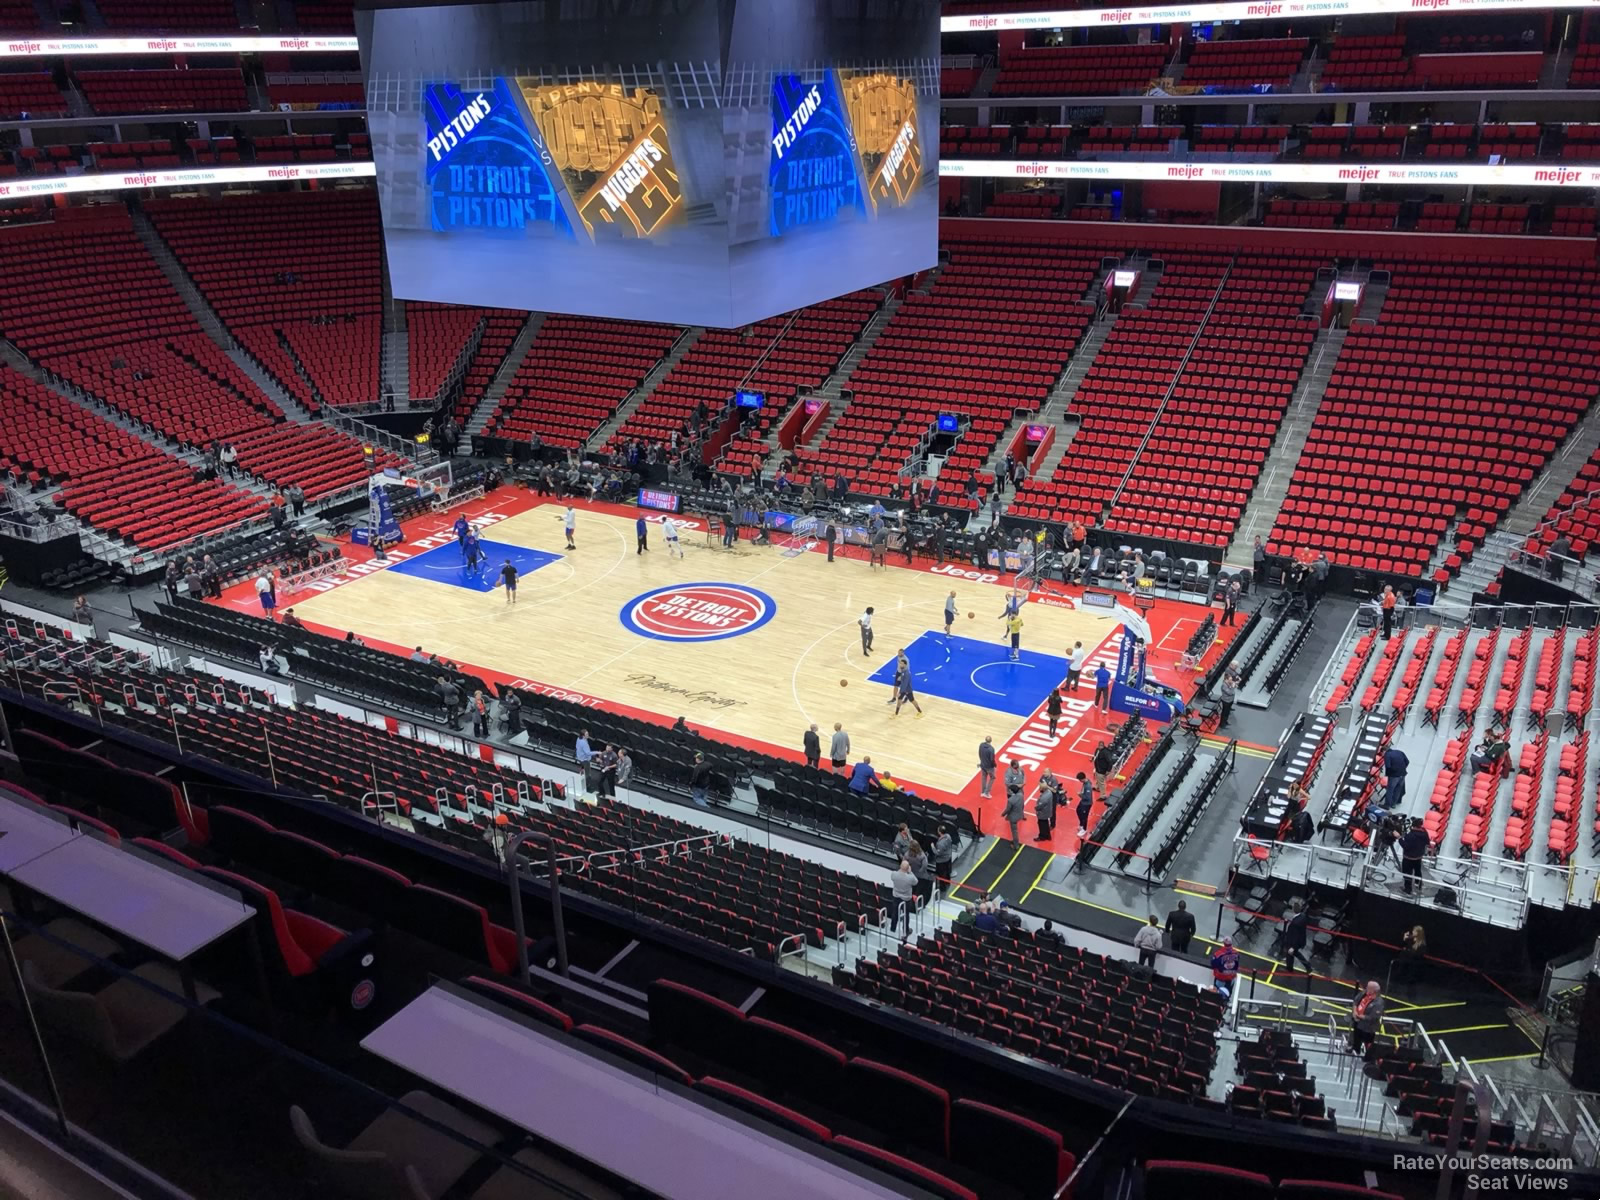 mezzanine 7, row 2 seat view  for basketball - little caesars arena